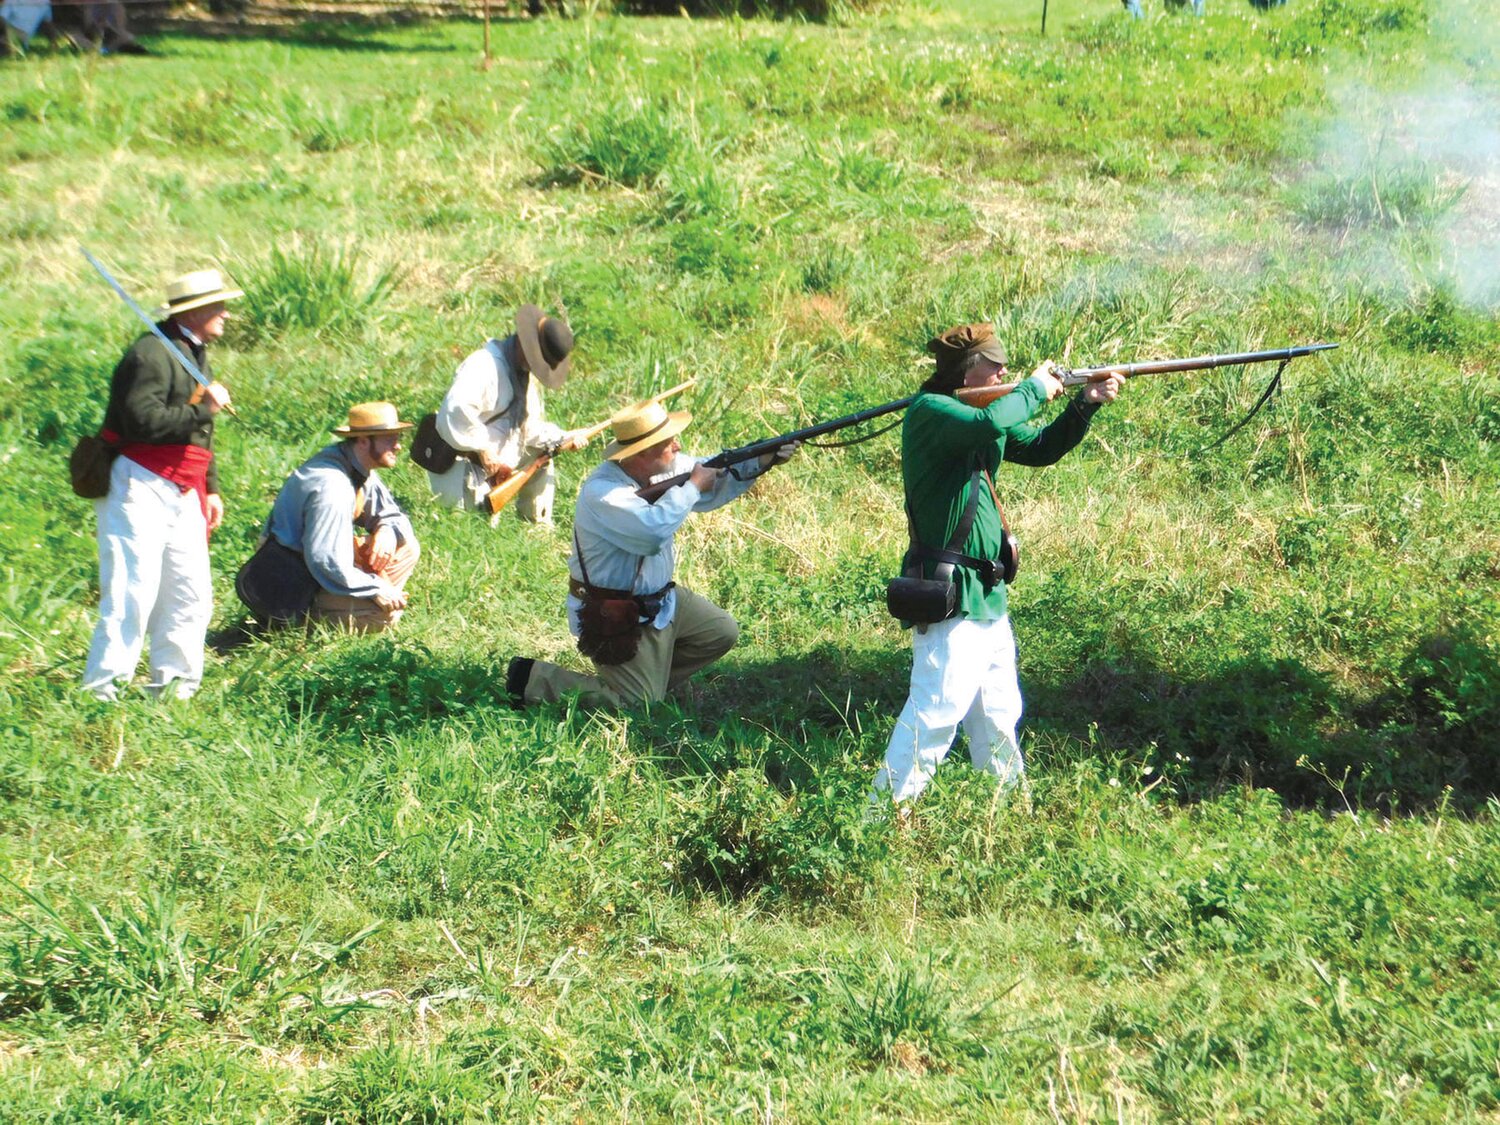 This picture is from a previous year of the Battle of Okeechobee Re-enactment.